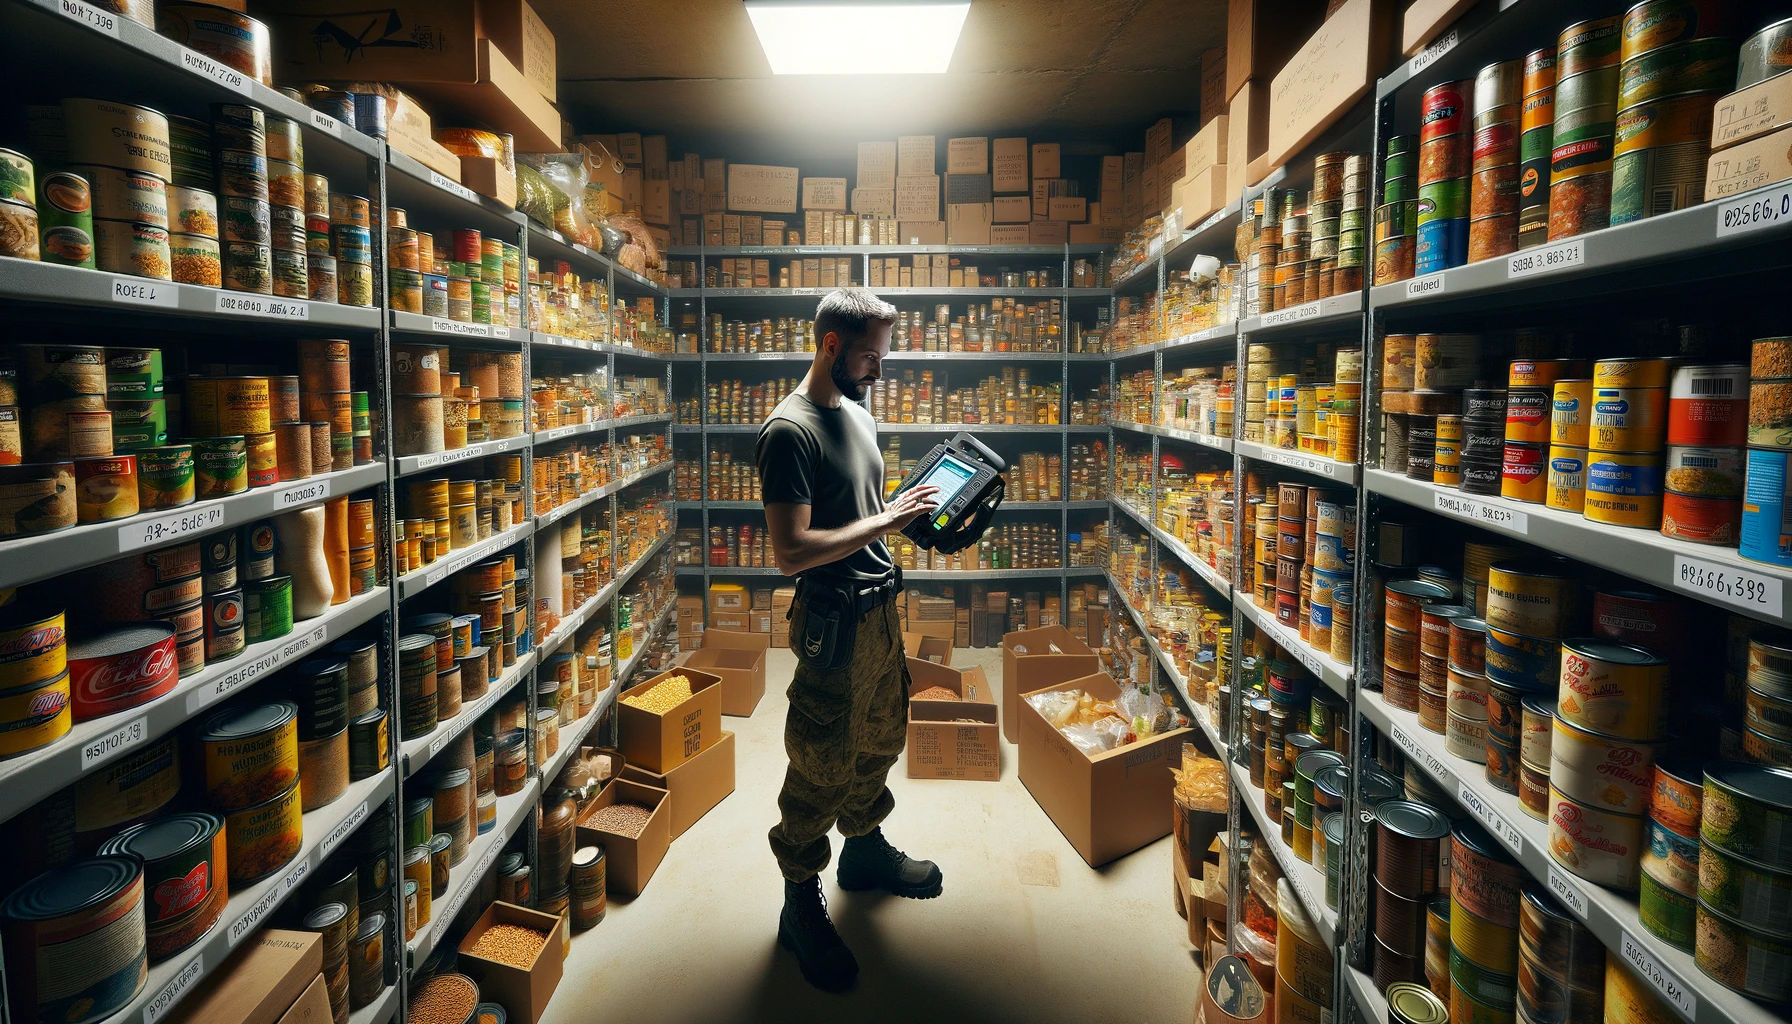 A prepper in gear efficiently manages a food rotation system in a large-scale, meticulously organized pantry room, filled with shelves of non-perishable food items, using a handheld device to scan items for optimal sustainability and readiness